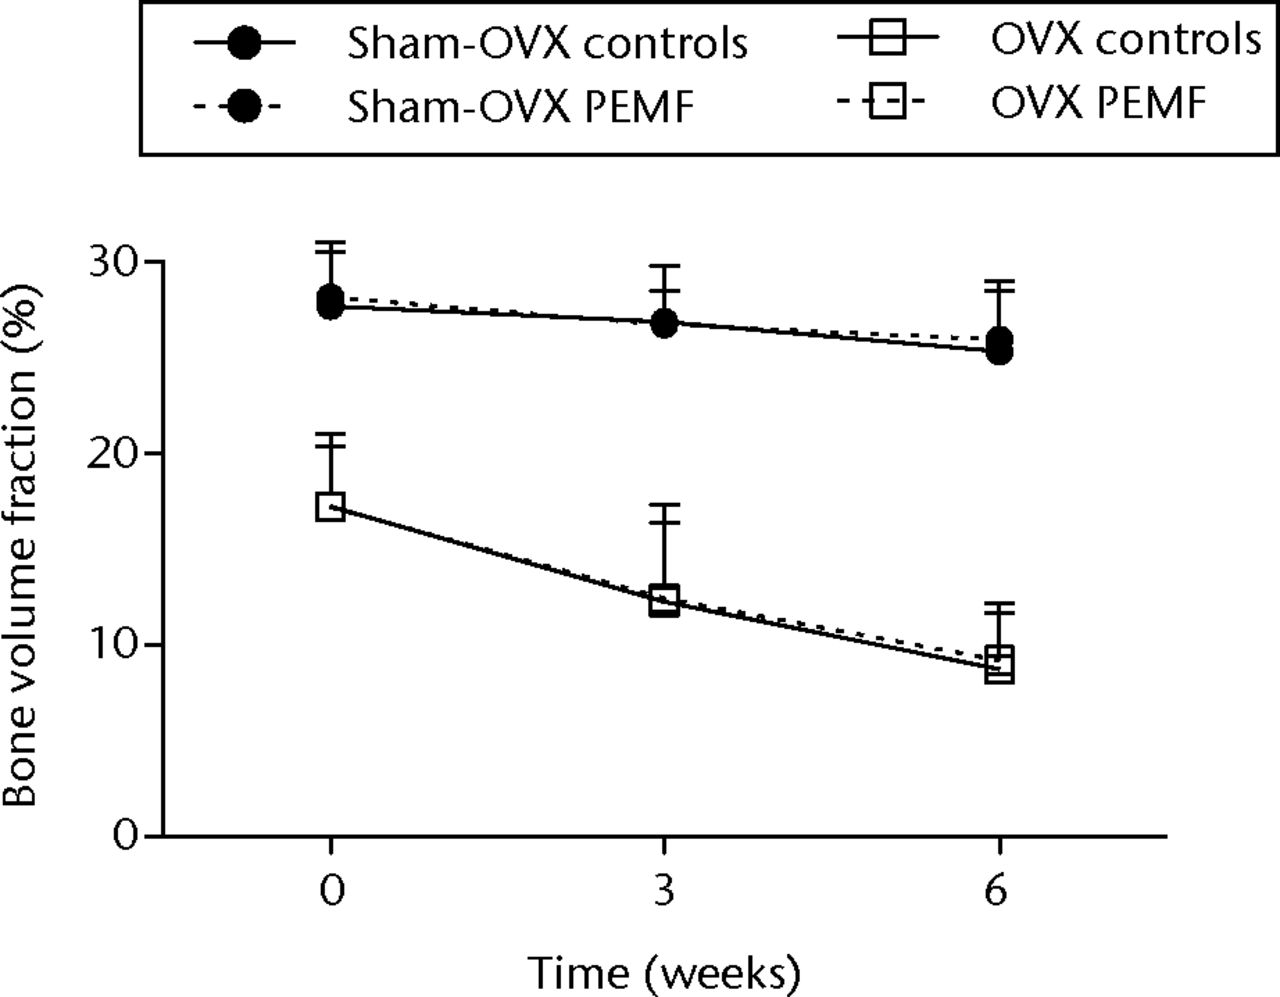 Figs. 2a - 2c 
          Graphs showing a) trabecular
volume fractions, b) cortical volume and c) mineralised callus volume
of electromagnetic field-treated and non-treated control tibias
in sham-ovariectomised (n = 7) and in ovariectomised (n = 8) rats.
Data are presented as mean values and standard deviations.
        